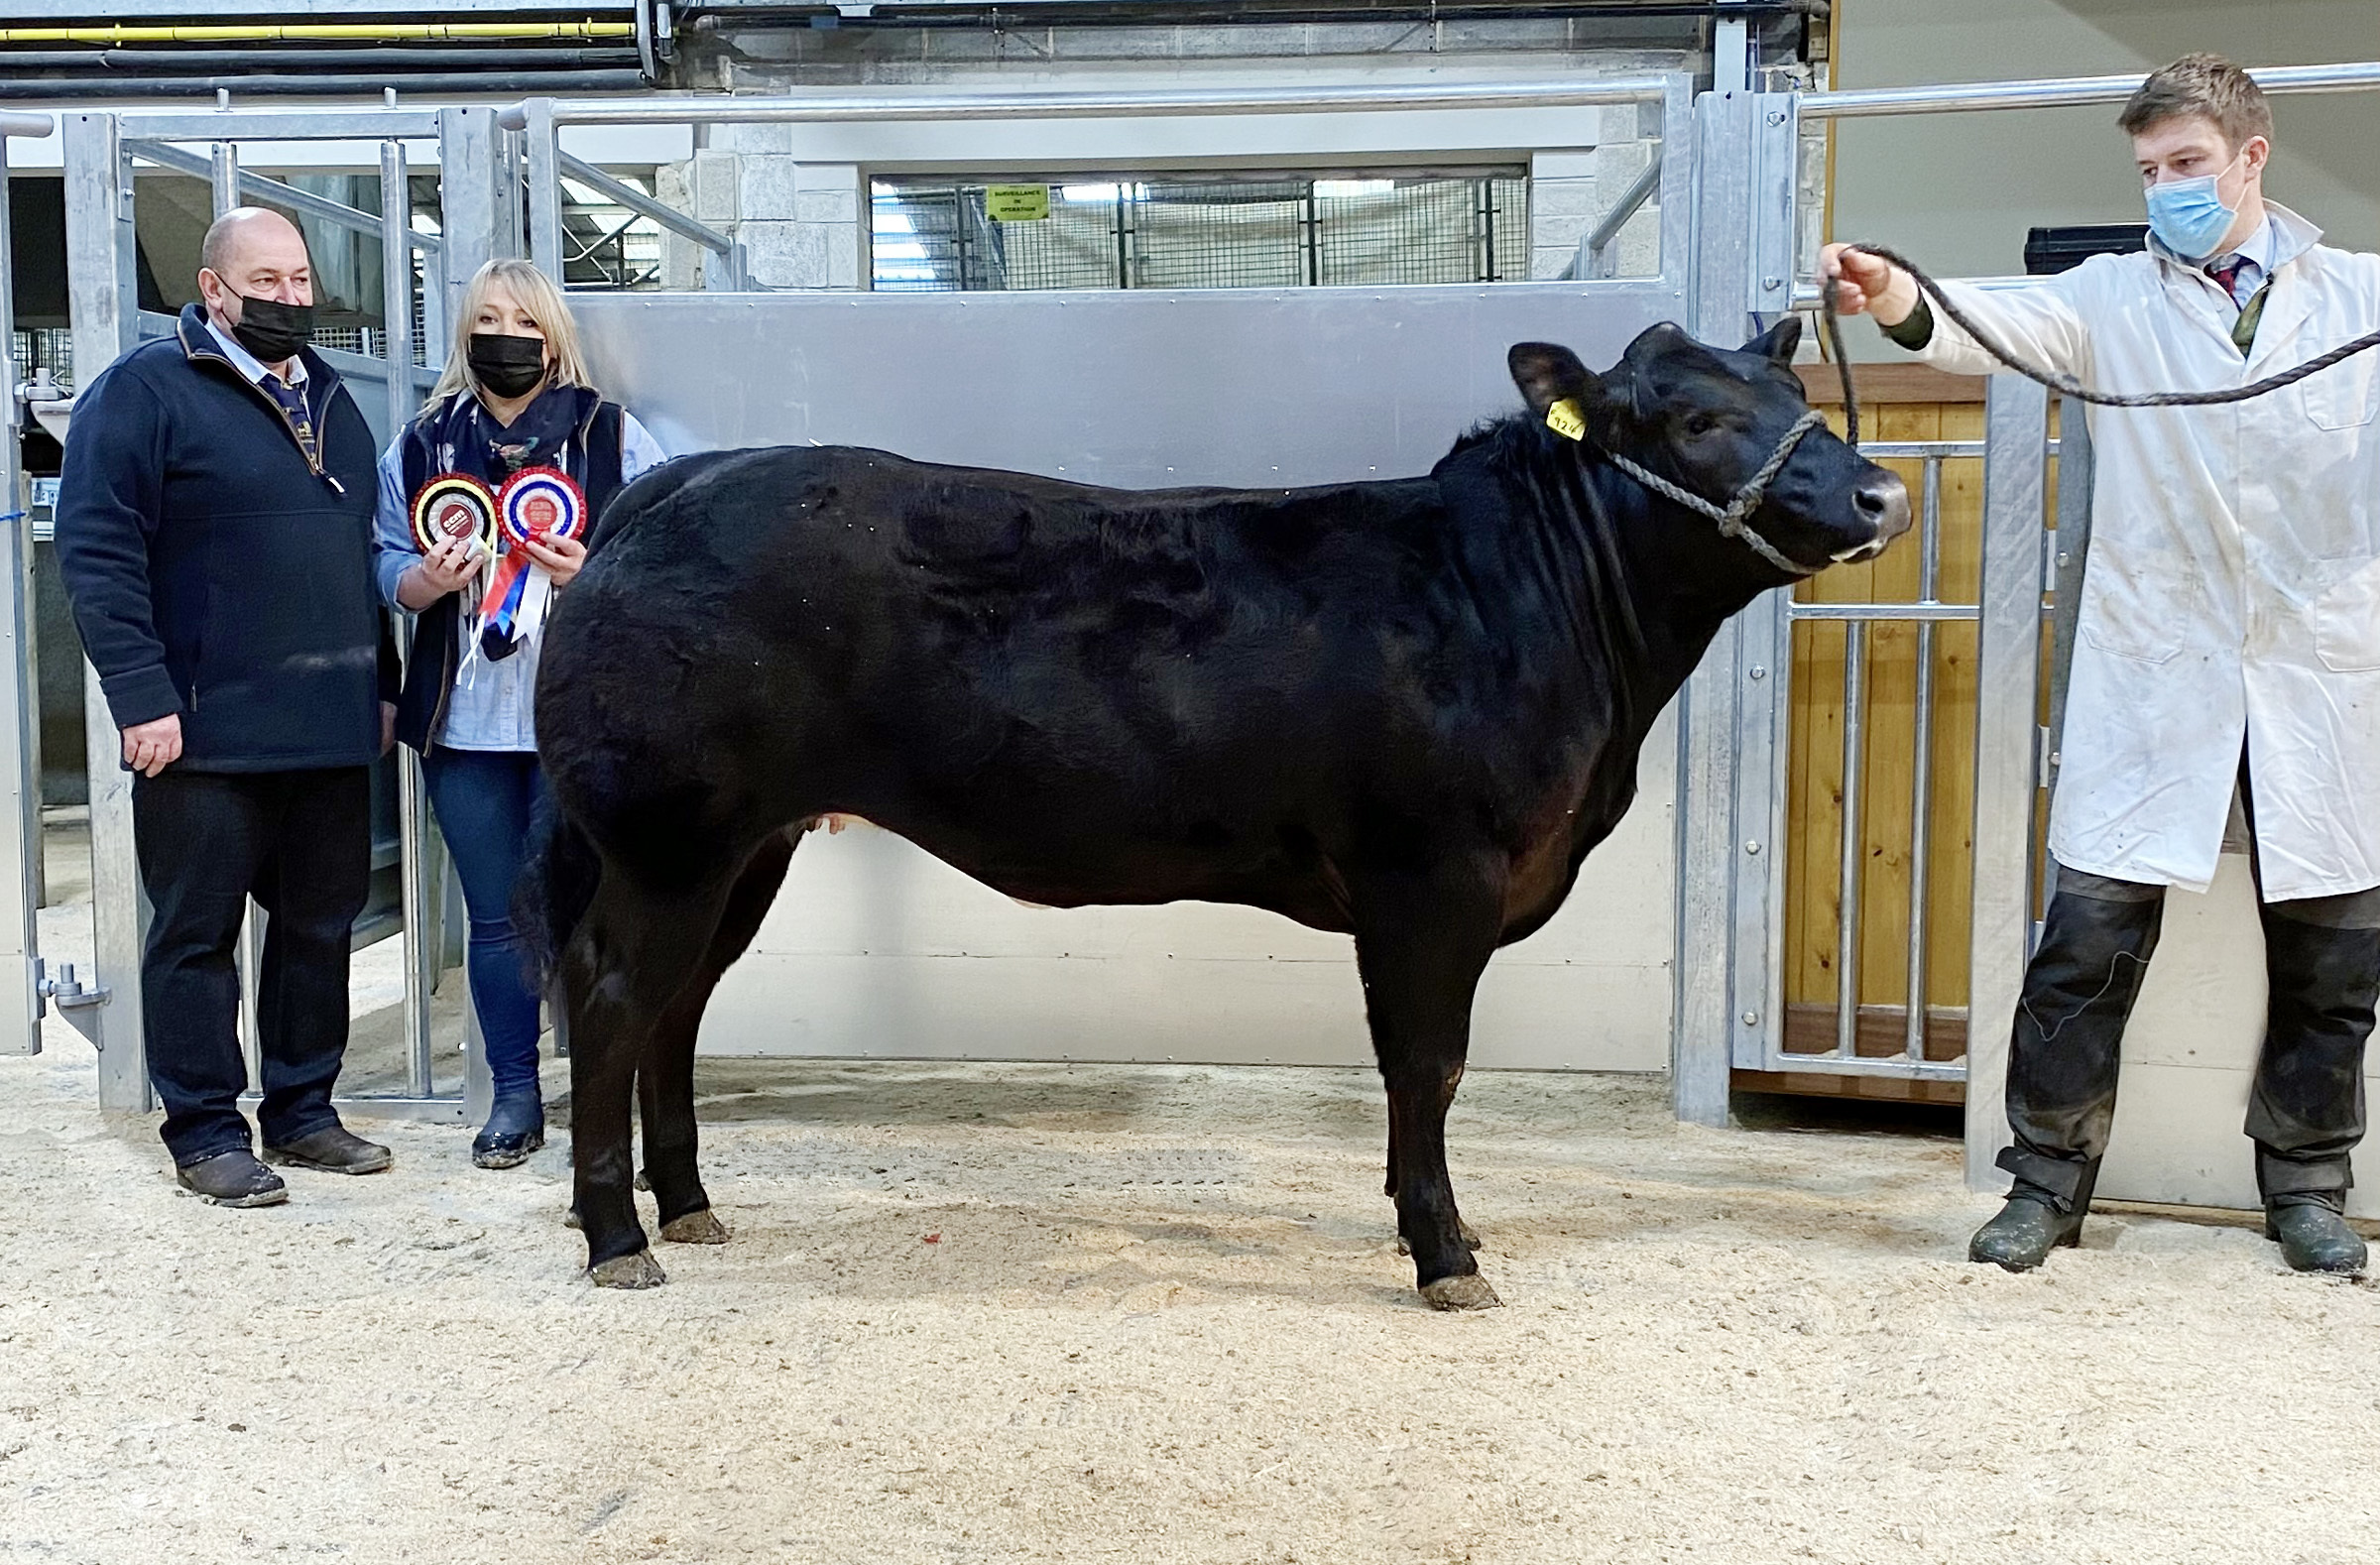 This British Blue cross heifer took champion for the Walker family pictured with the judges, John Mellin and Clare Cropper